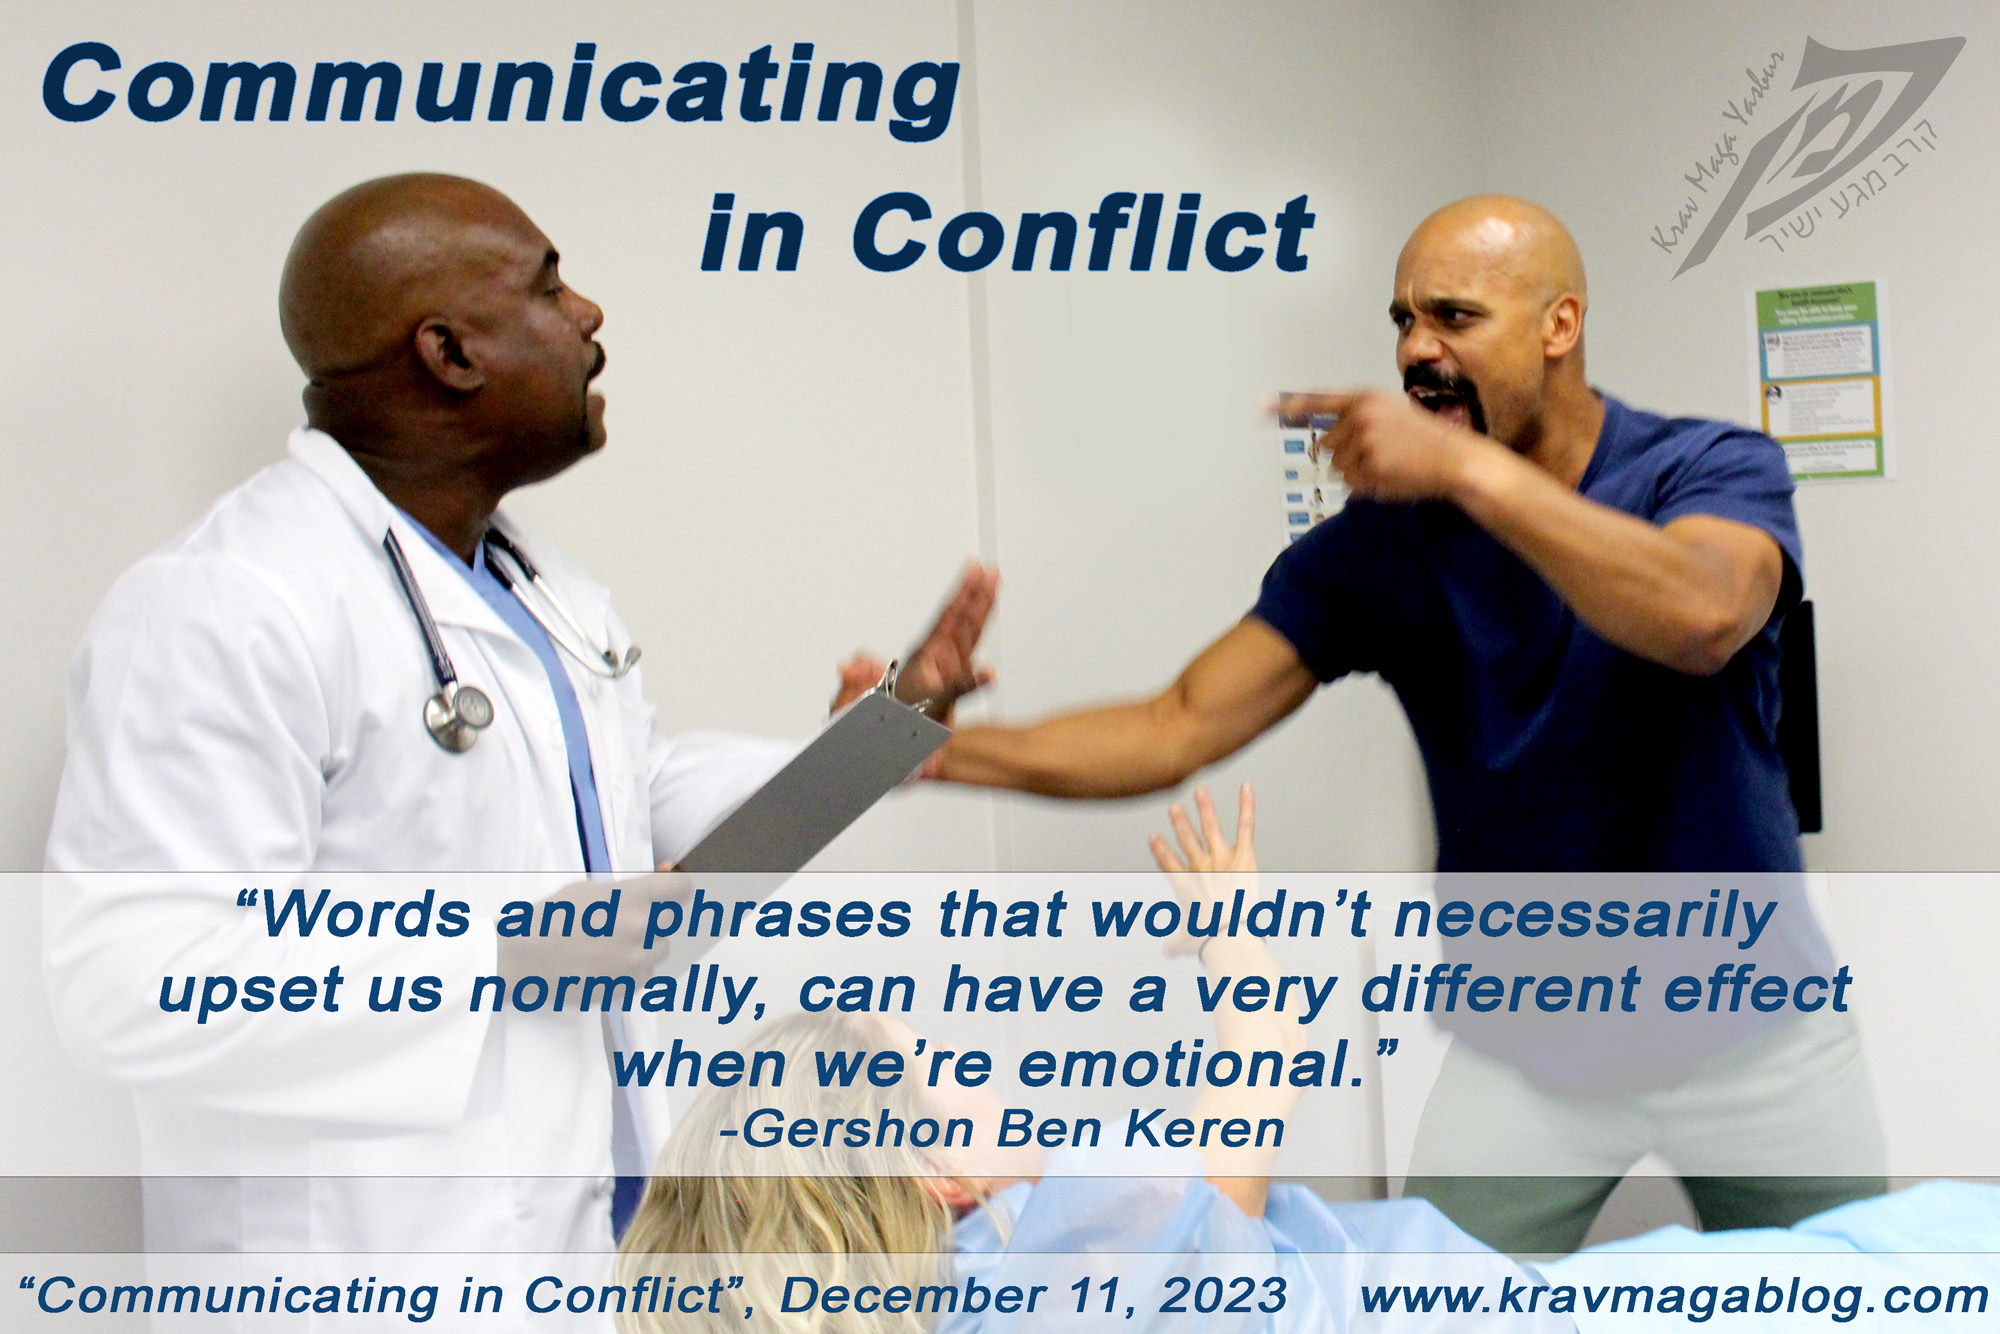 Blog About Communicating in Conflict